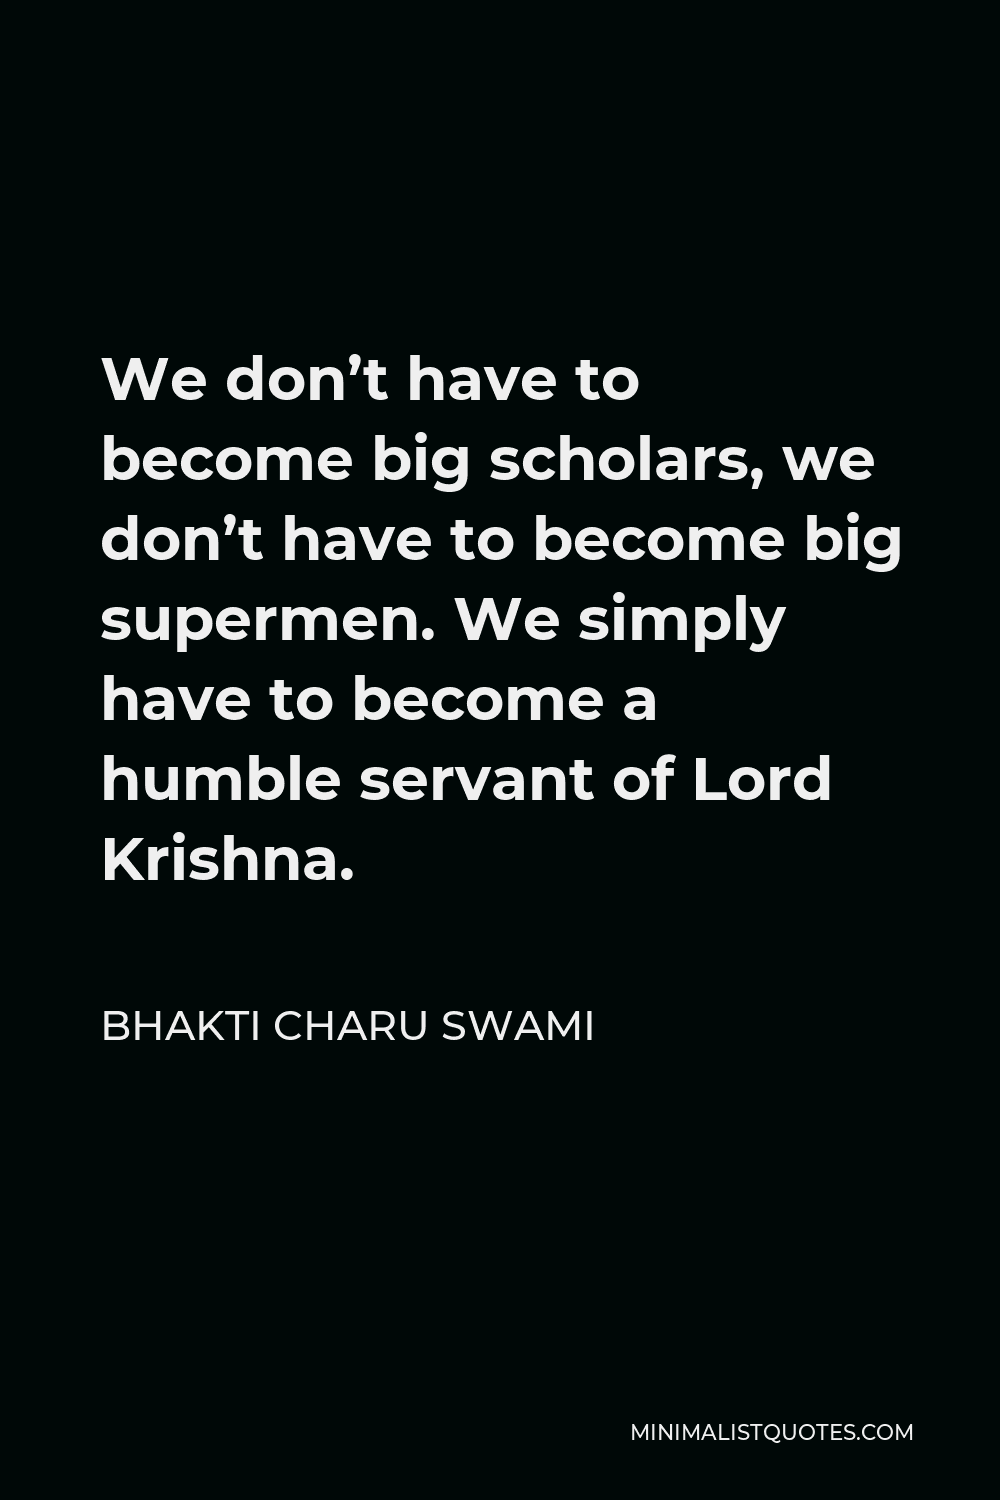 Bhakti Charu Swami Quote - We don’t have to become big scholars, we don’t have to become big supermen. We simply have to become a humble servant of Lord Krishna.